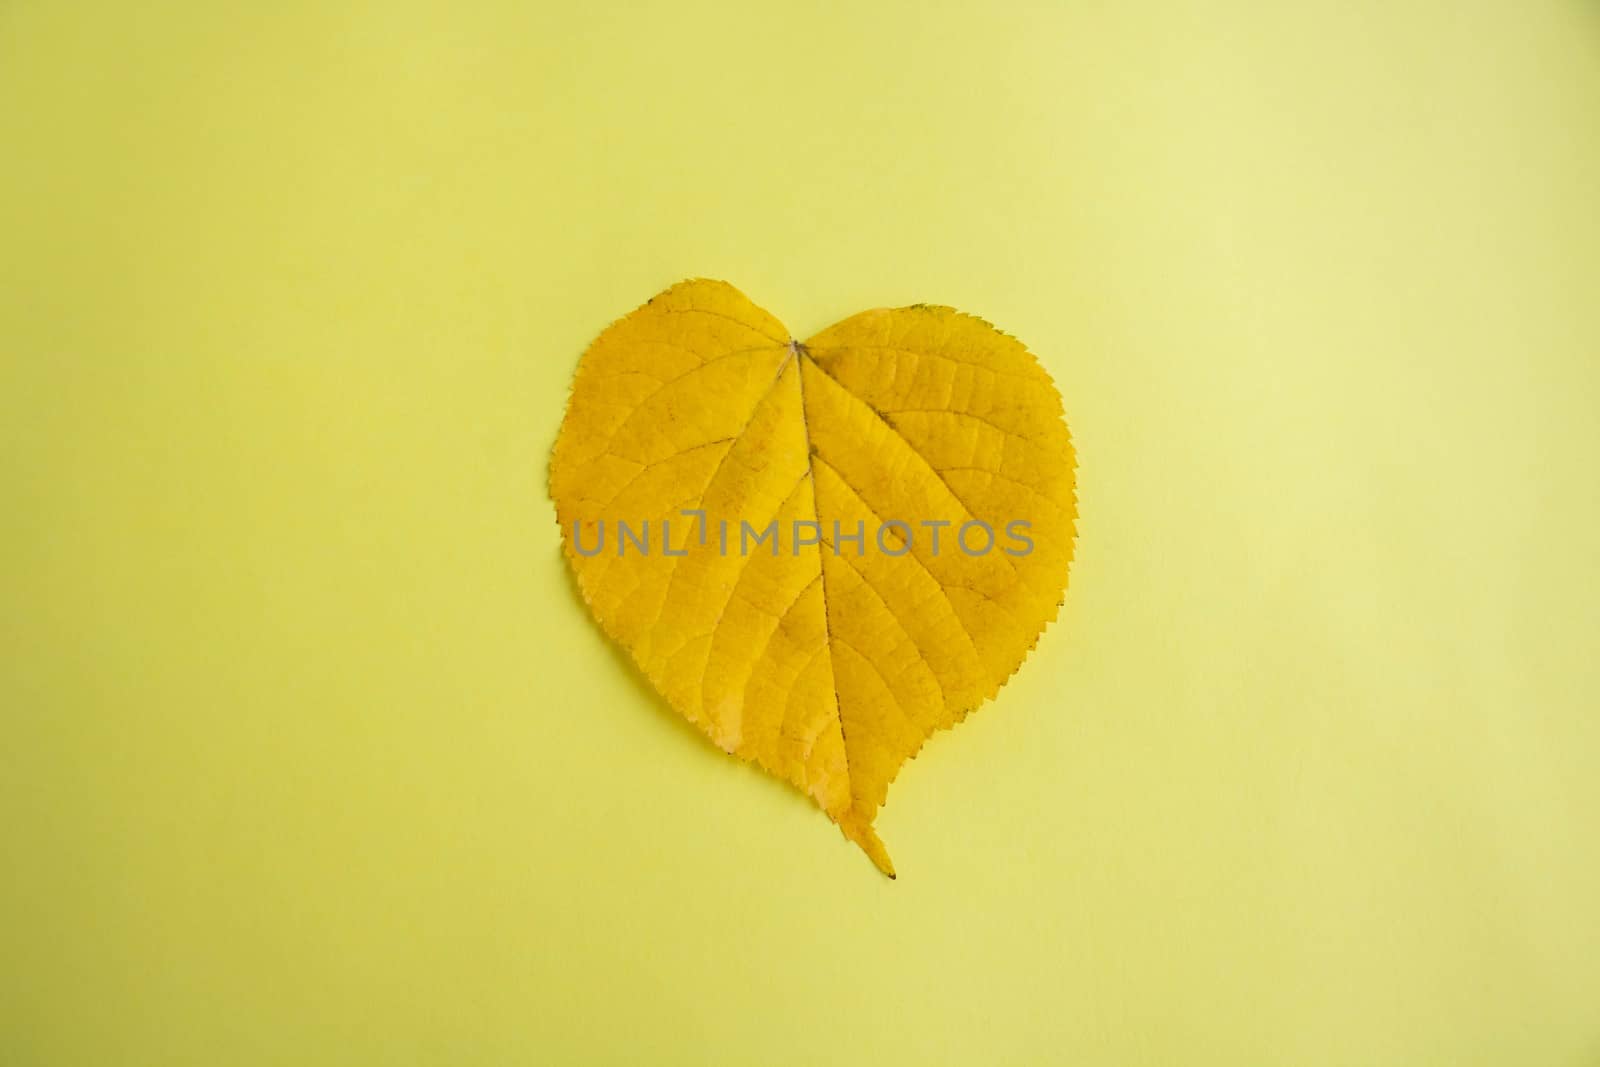 Yellow autumn leaf in the shape of a heart lies on a yellow background.